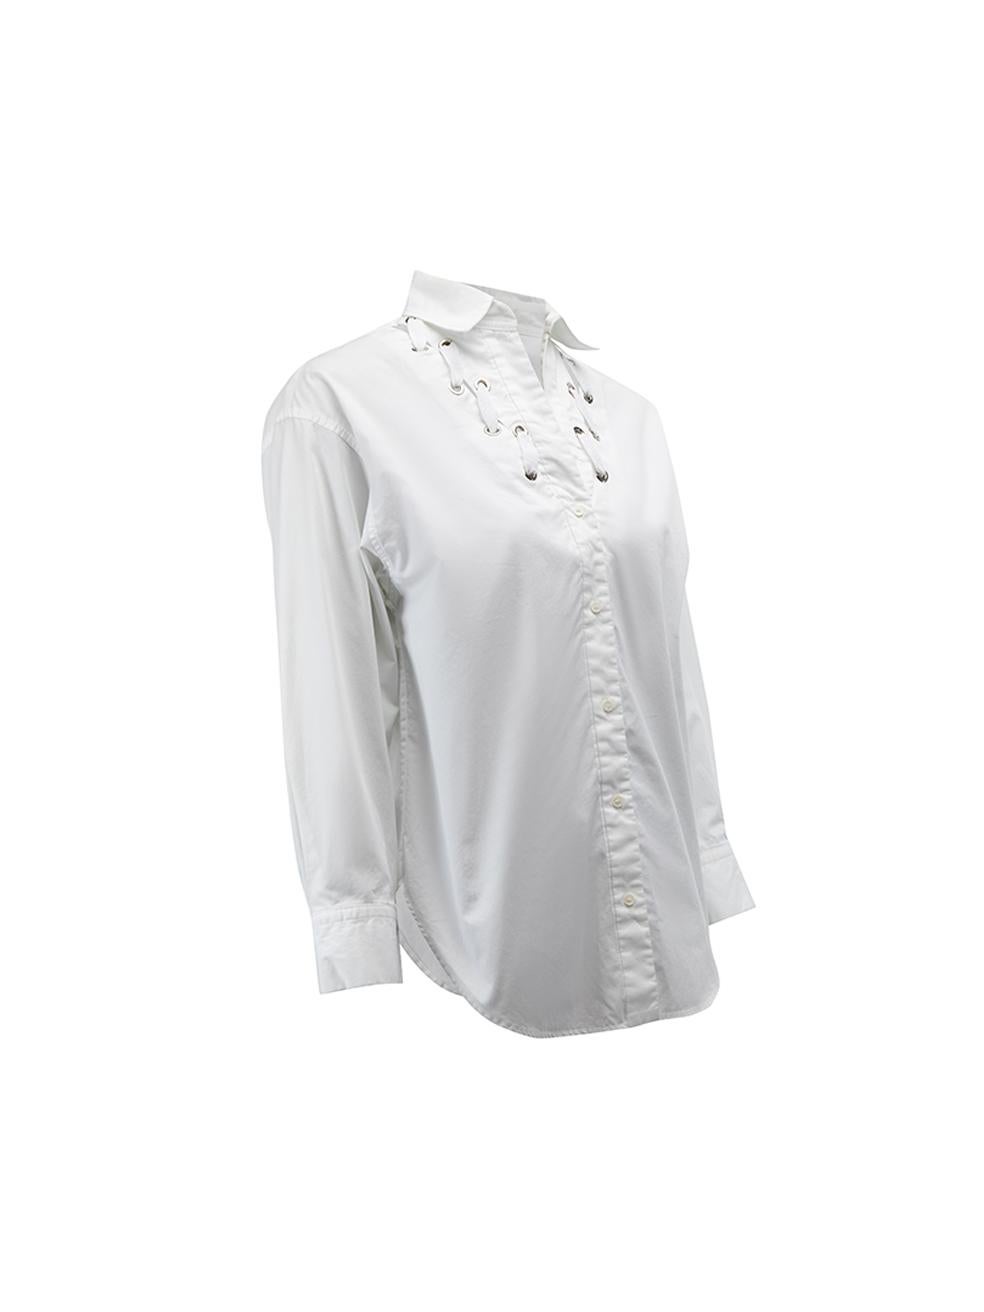 CONDITION is Very good. Minimal wear to top is evident. Minimal wear to the outer fabric where some marks can be seen on the left side and bottom of the top on this used Sandro designer resale item. 



Details


White

Cotton

Mid sleeves